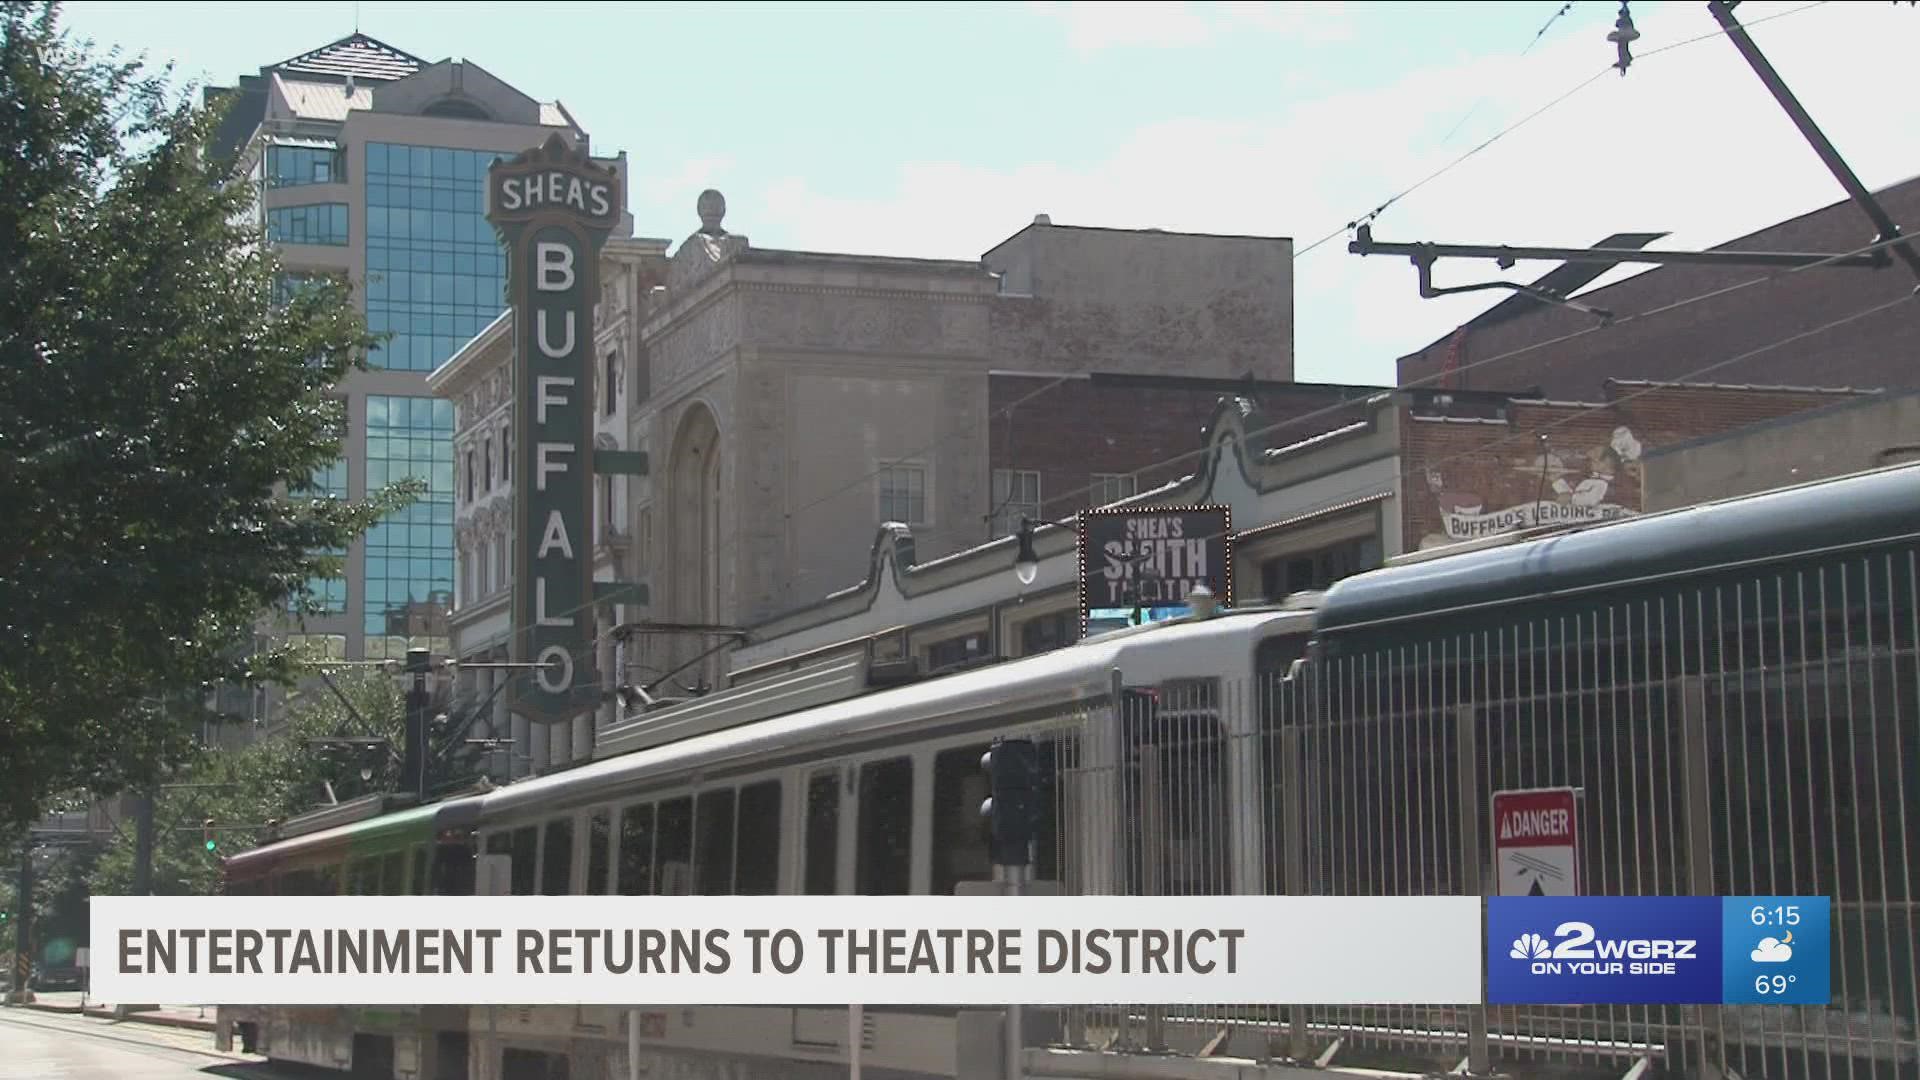 The action is returning to Buffalo's Theatre District after more than a year and a half with no performances.